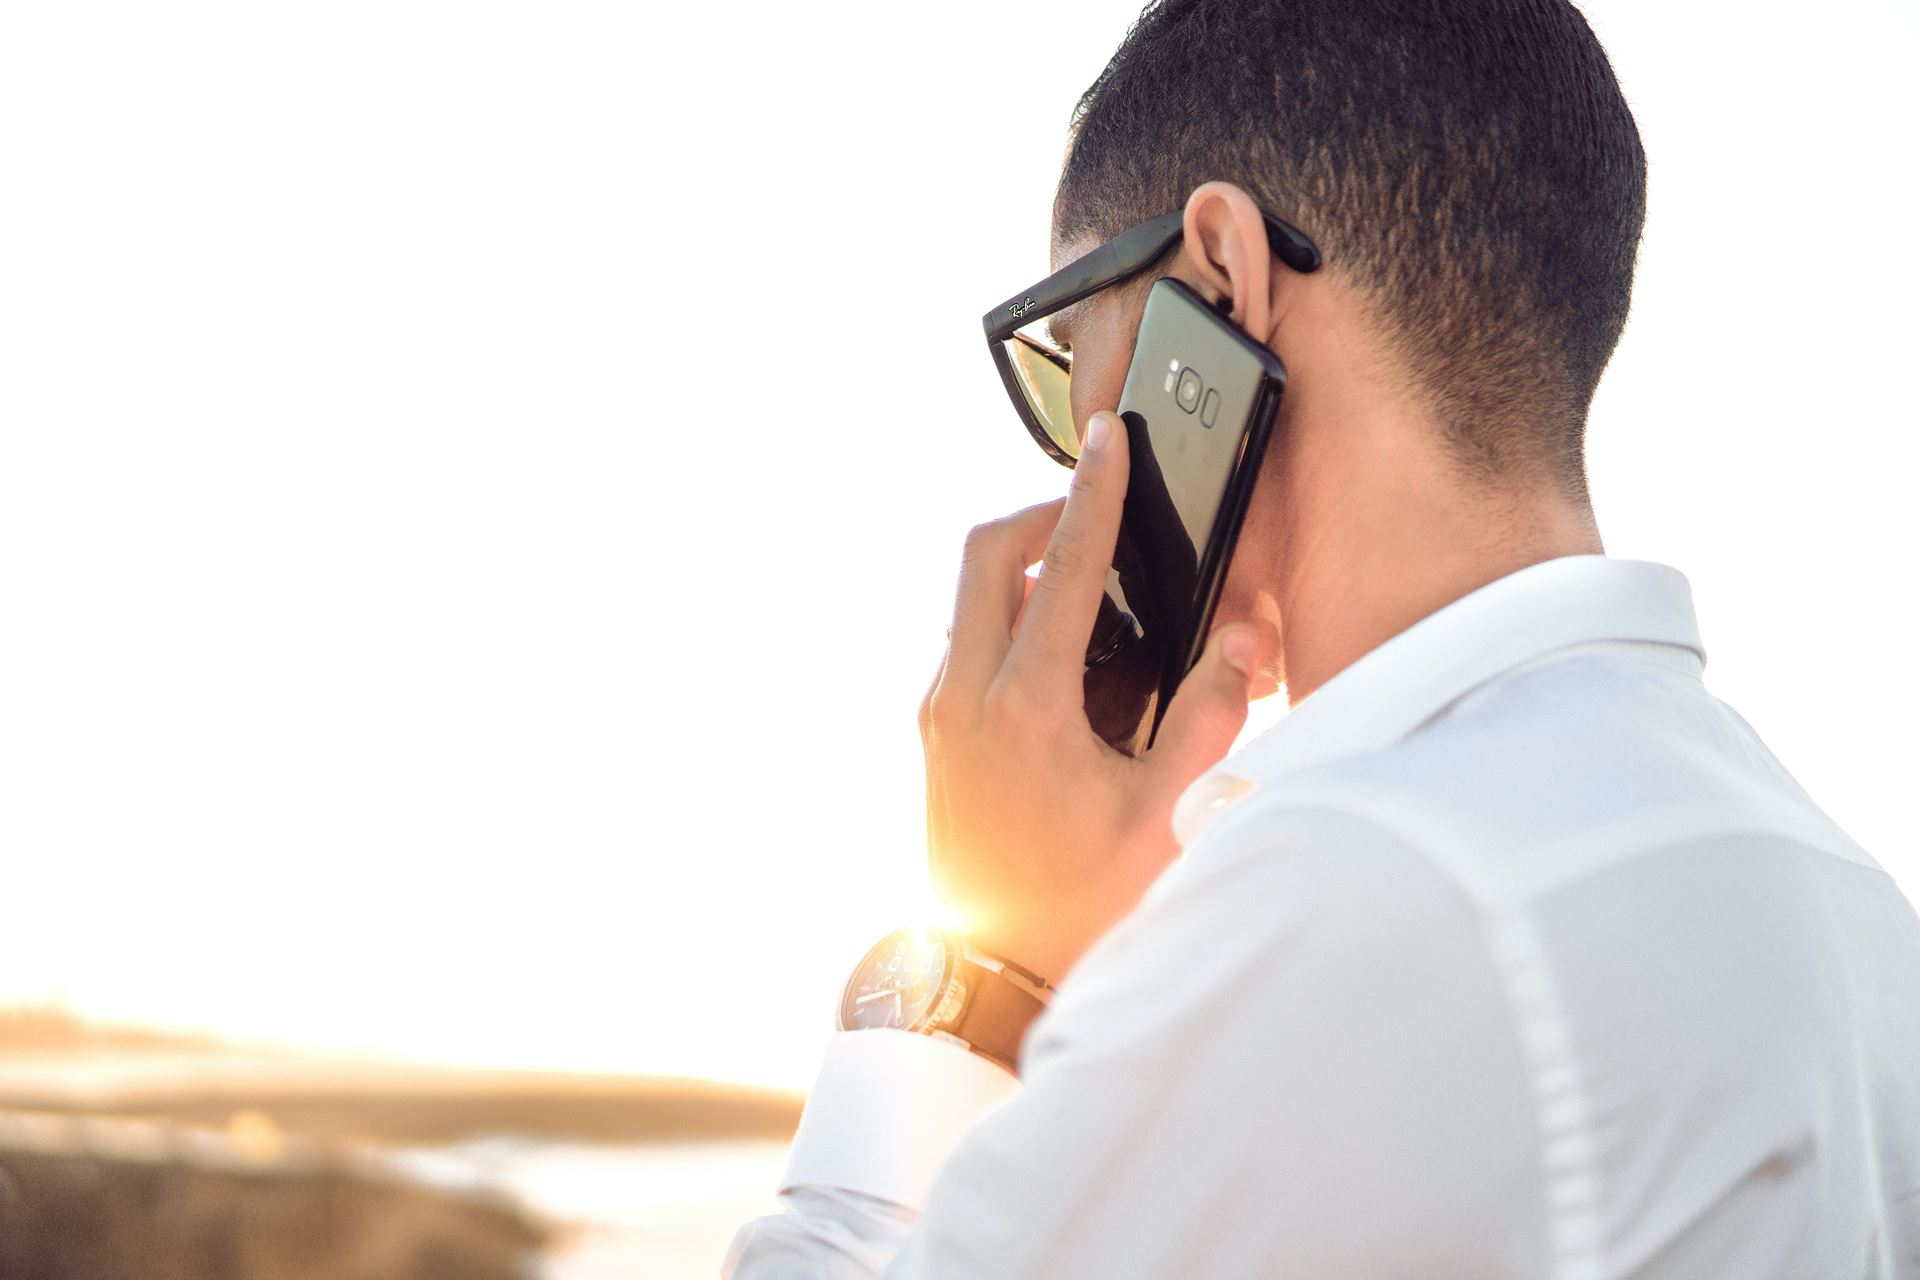 A person facing away, holding a mobile phone to their ear